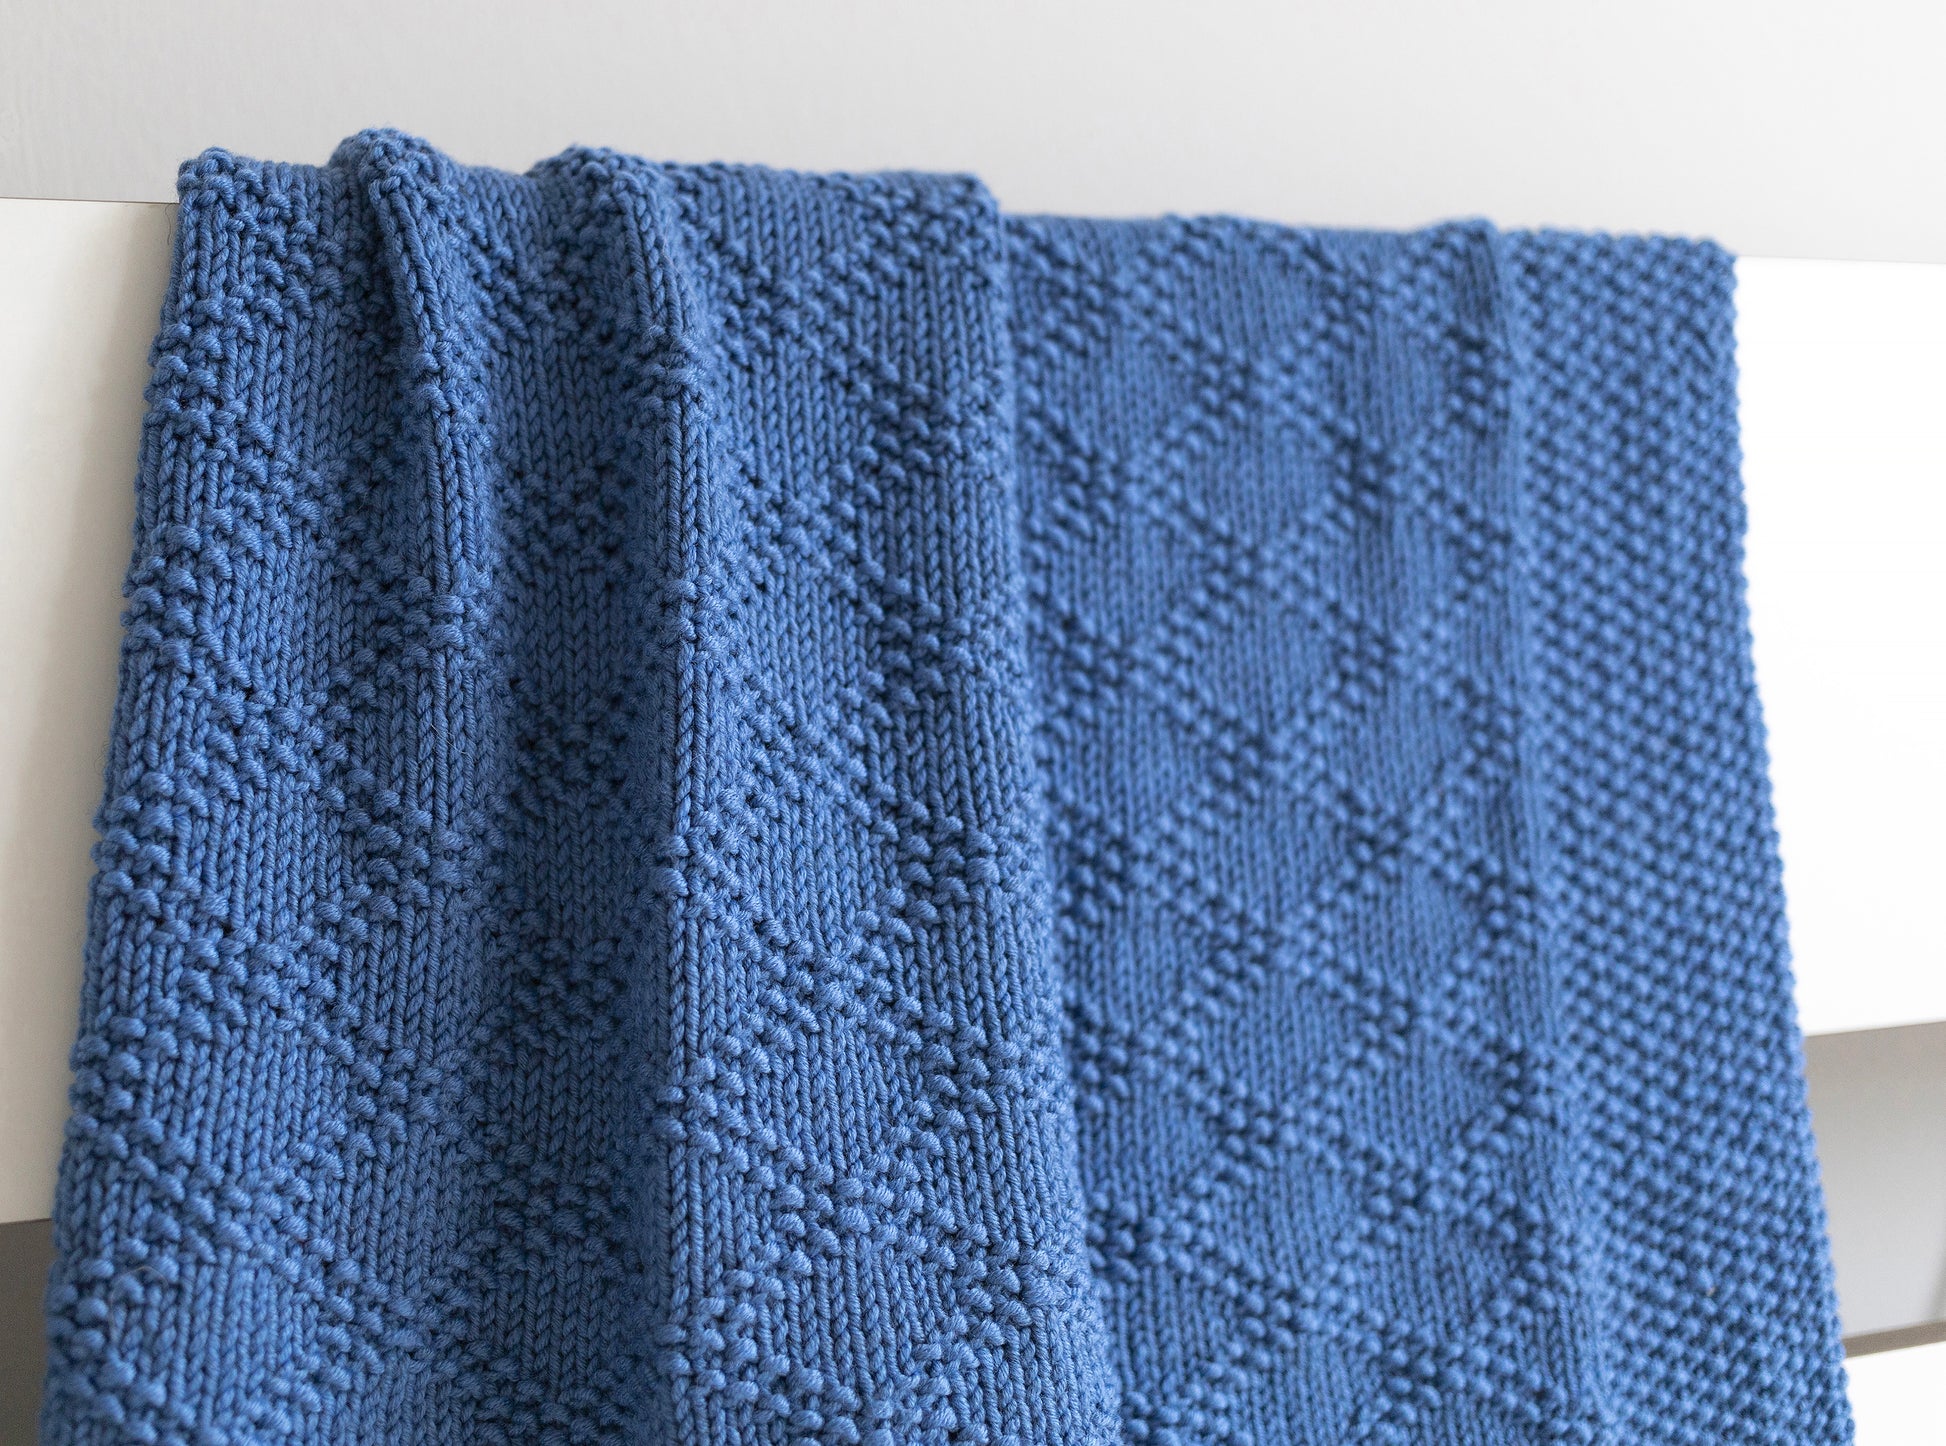 Close up for Merino wool hand-knitted baby blanket in Charles Brocade knitting pattern